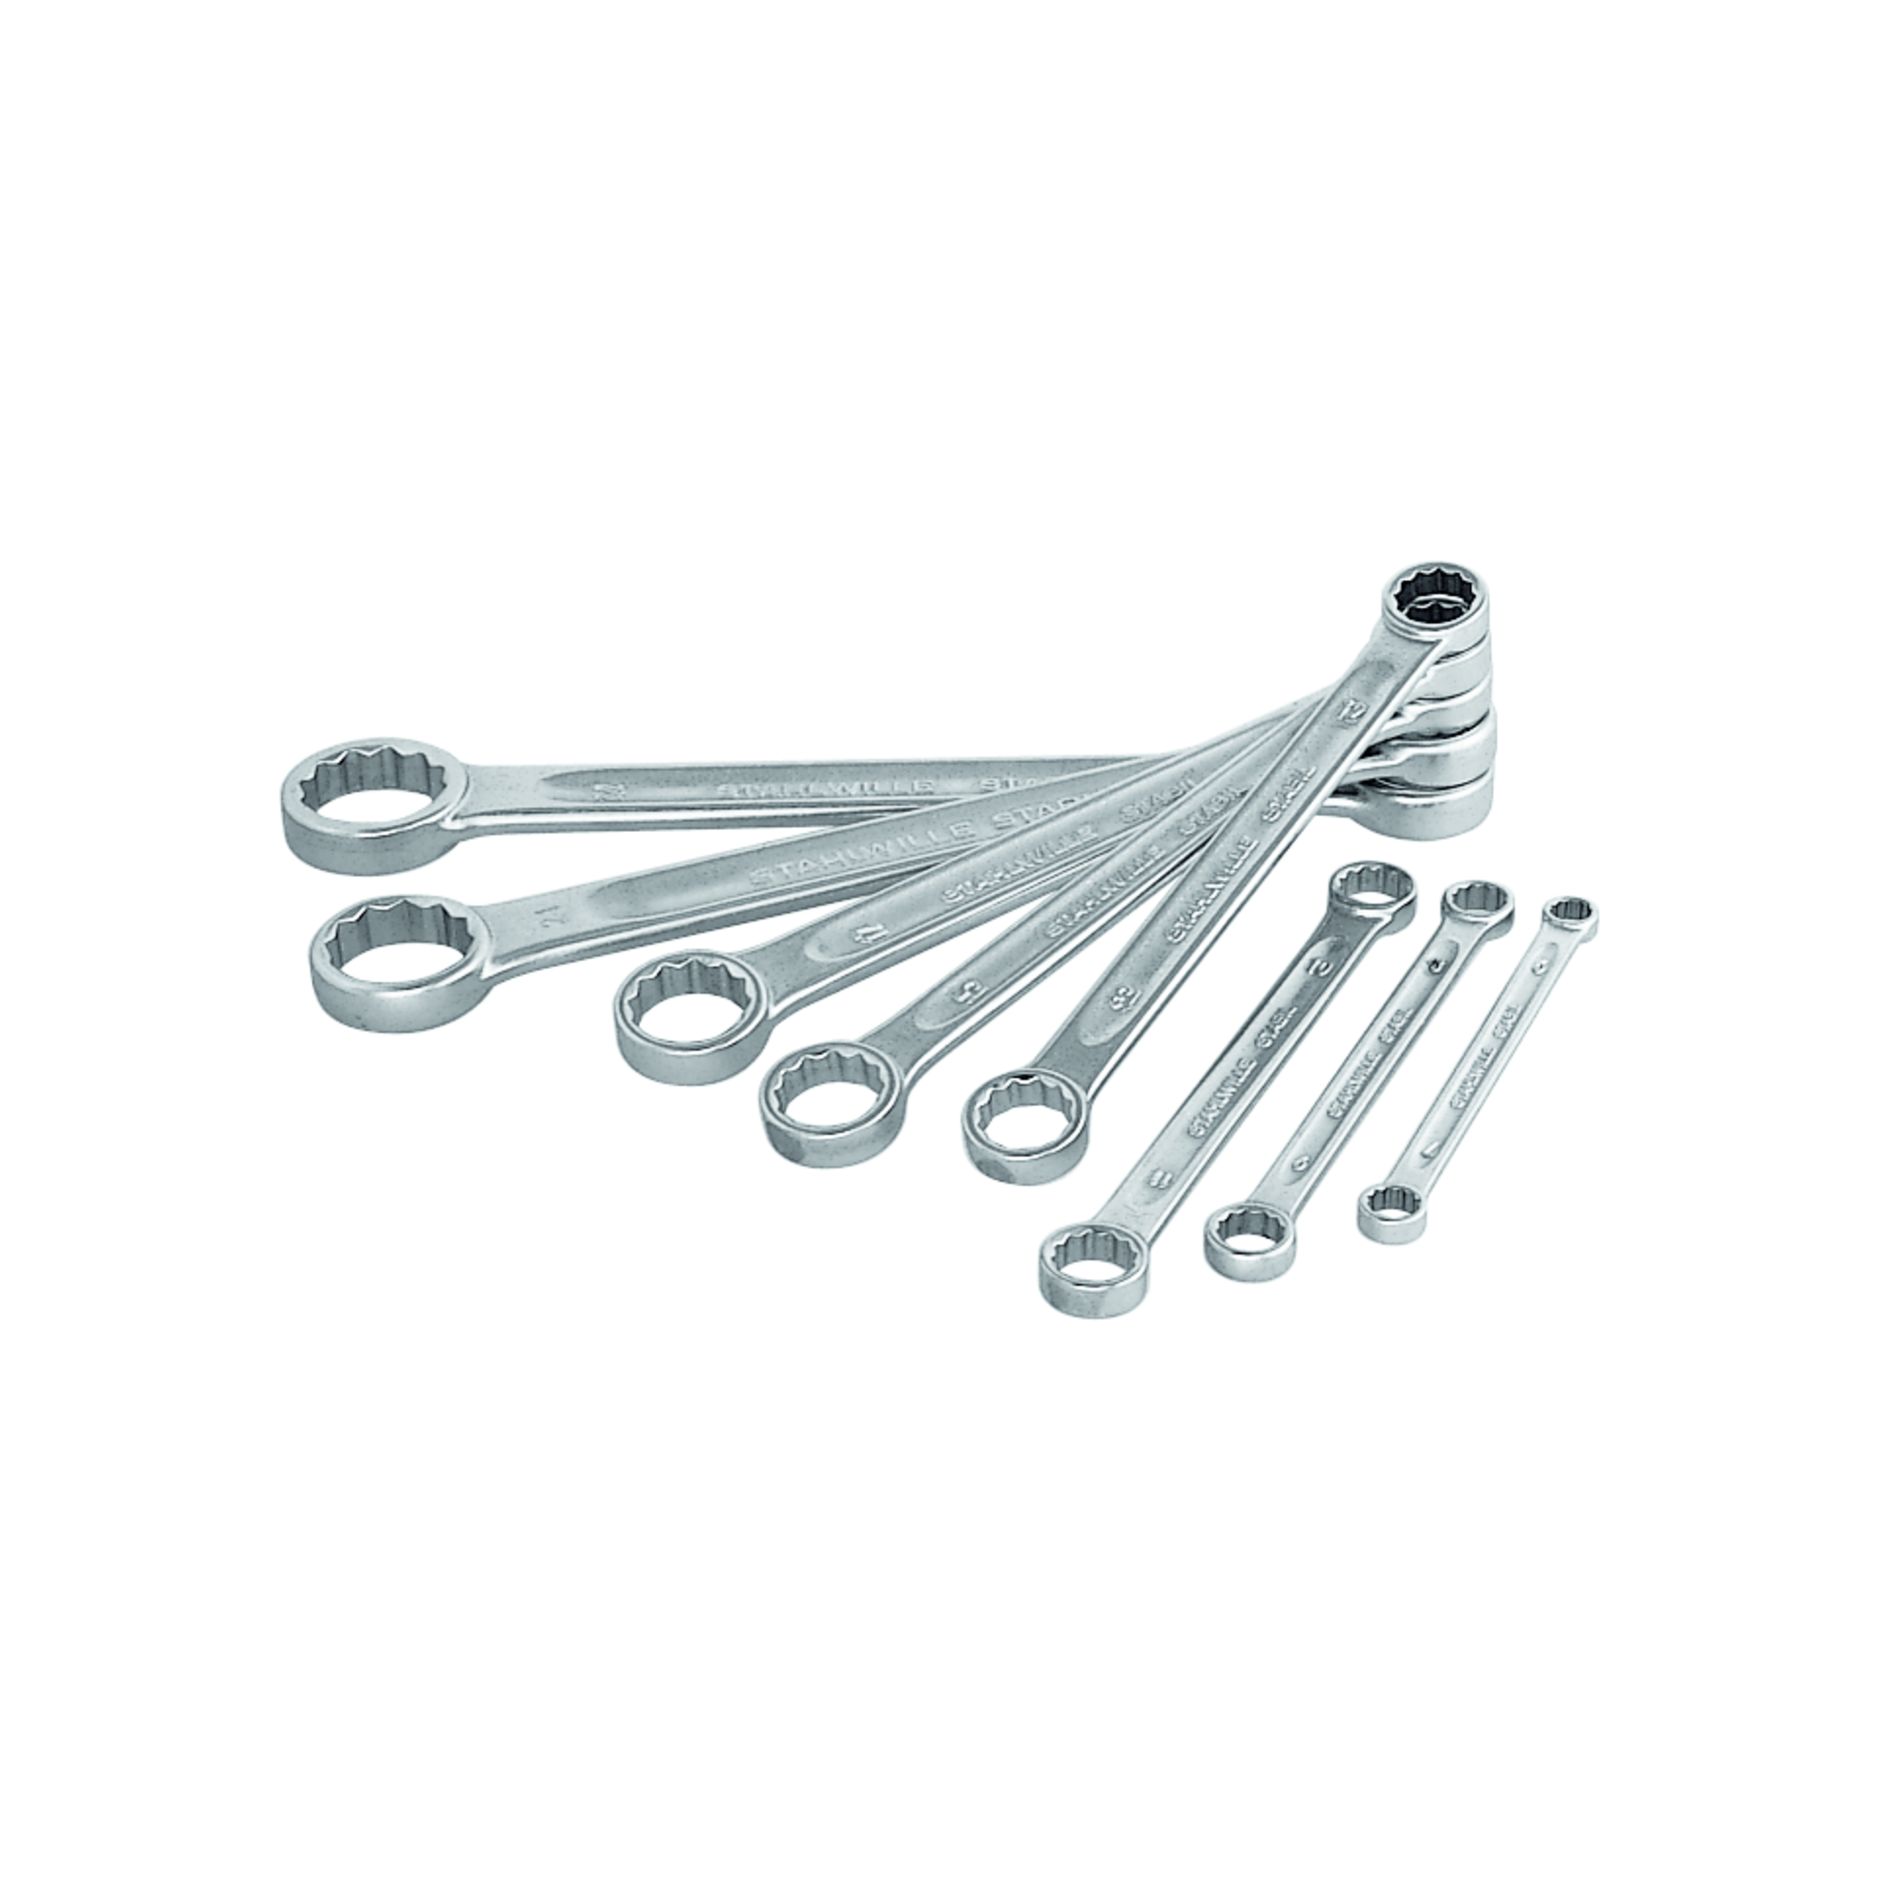 Buy STAHLWILLE Ratchet combination spanner sets, 5 or 12 pieces